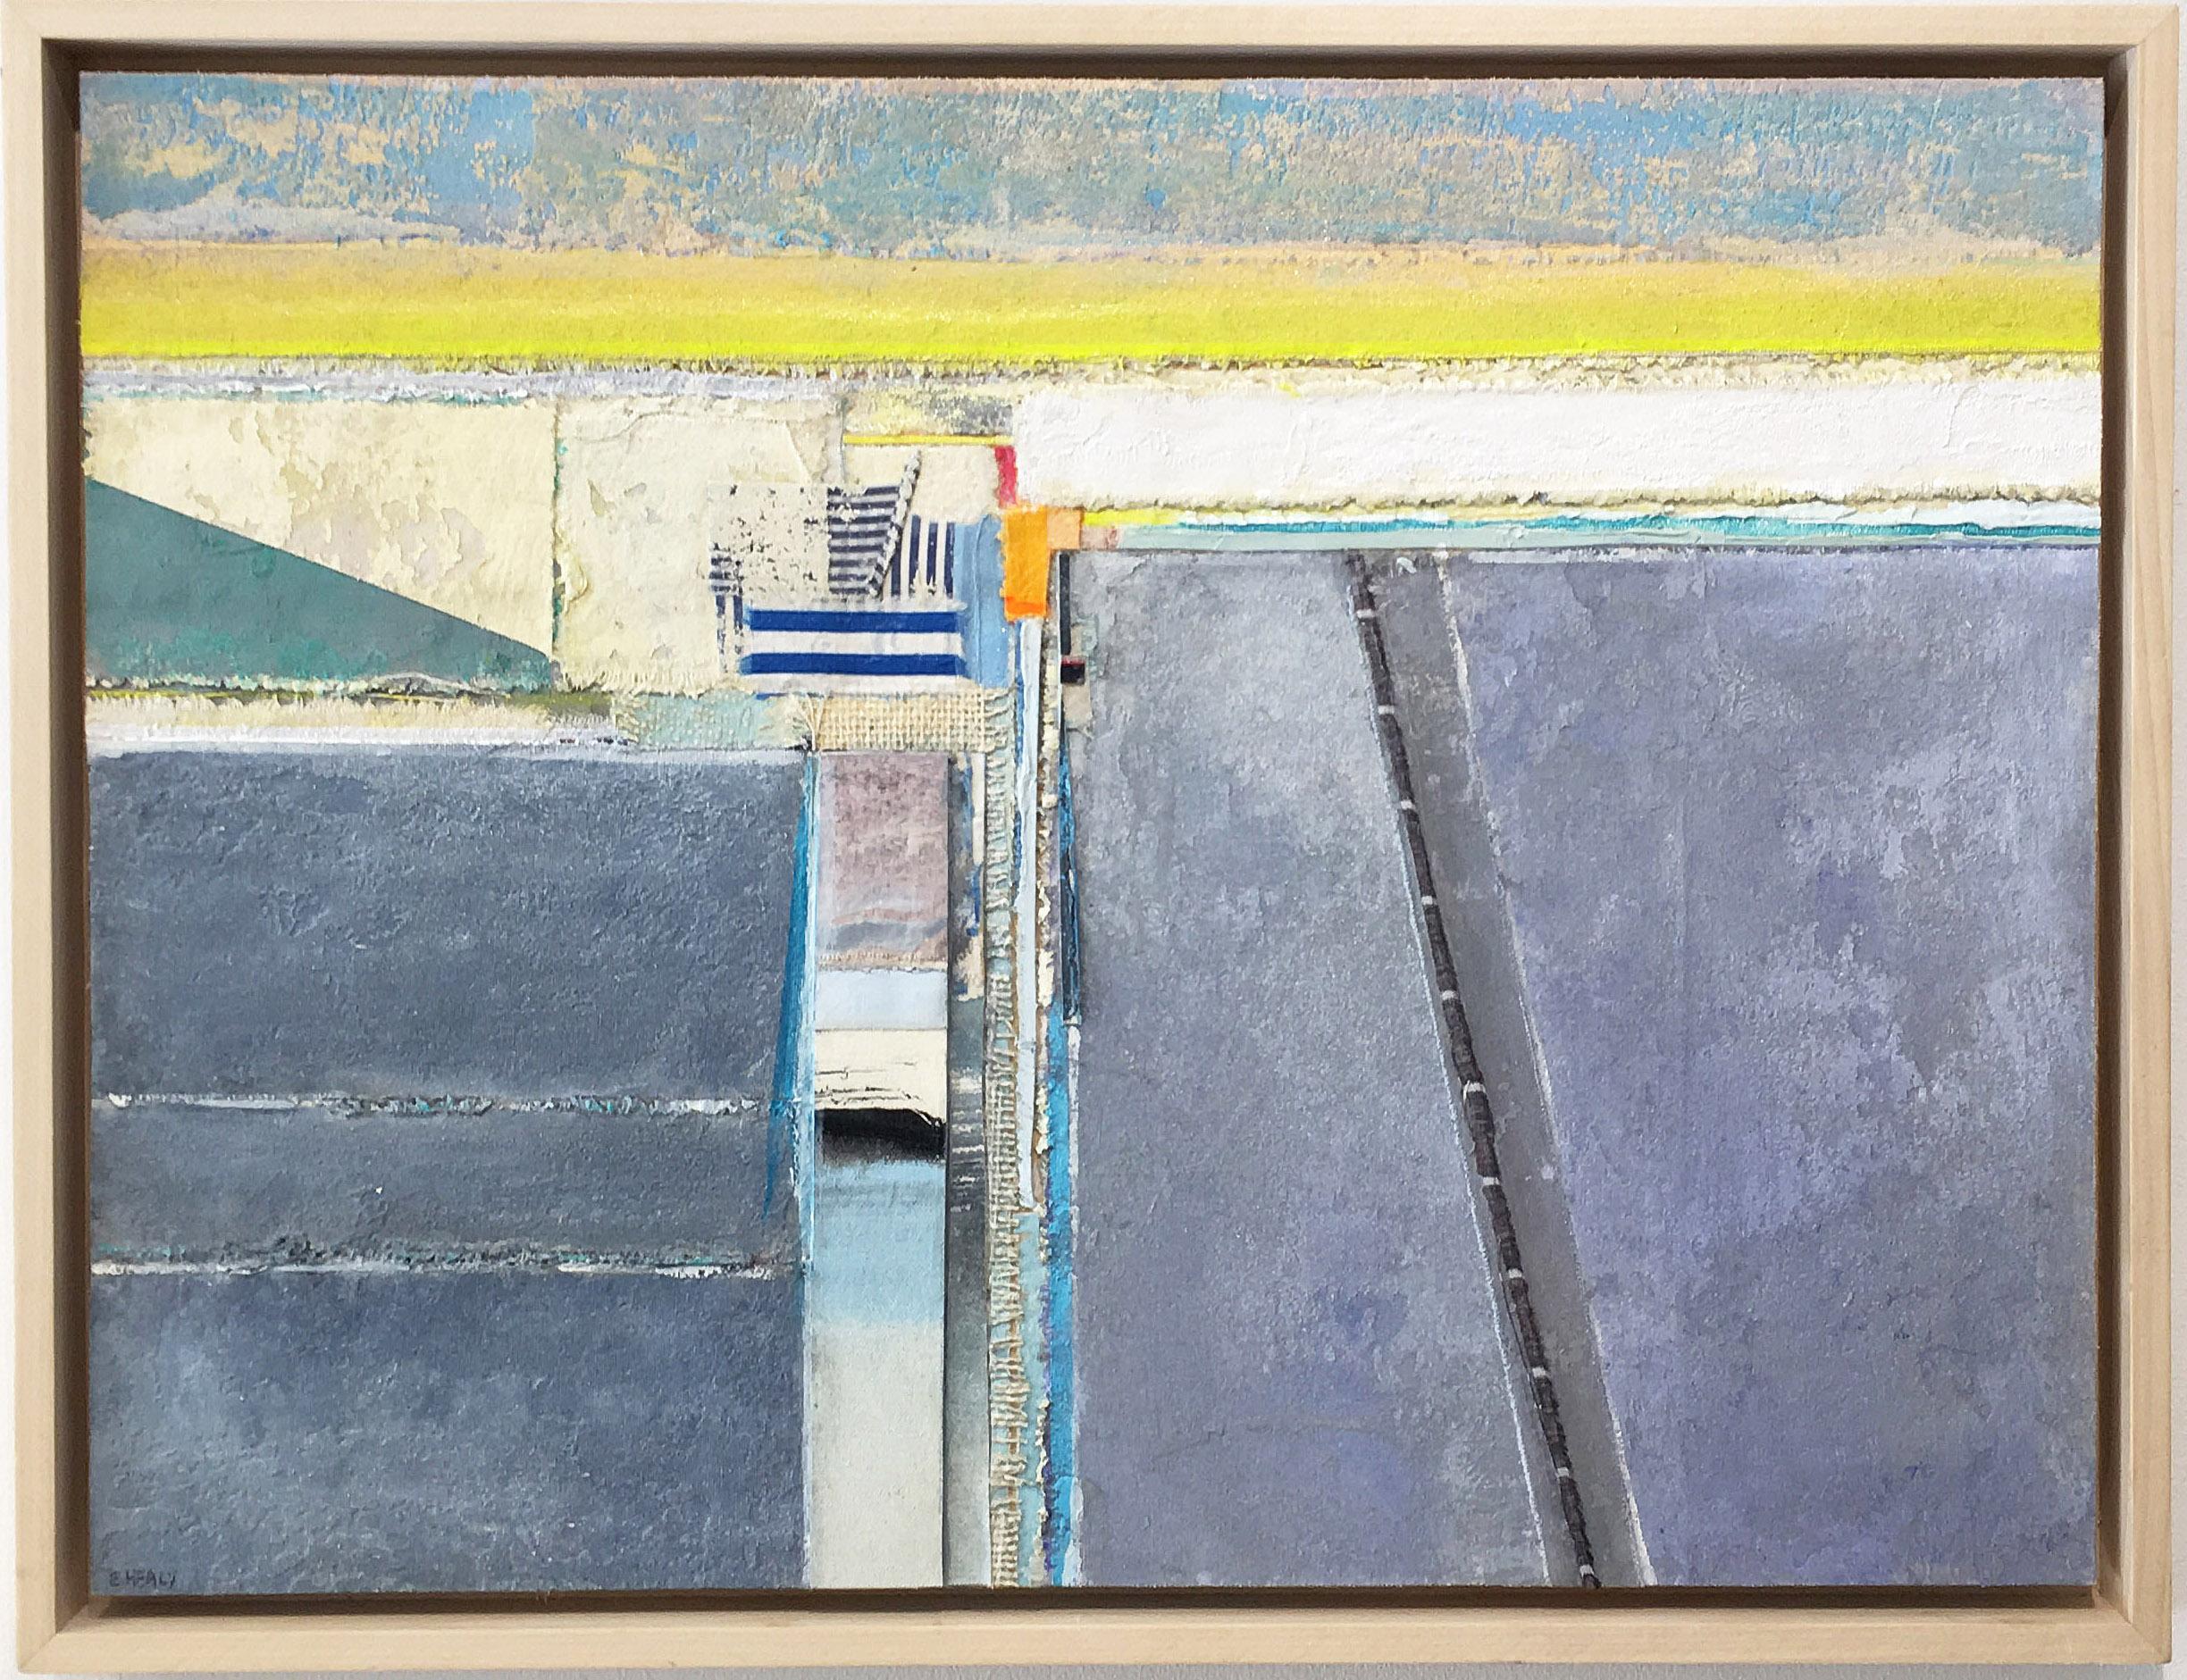 'Coastal Series #20' by Eugene Healy, 2019. Oil and fabric collage on canvas, 19 x 25.25 in. / Frame: 21 x 27 in. This landscape painting features an abstracted coastal scene with land and sea in aerial view. In calming colors of blue, grey, green,